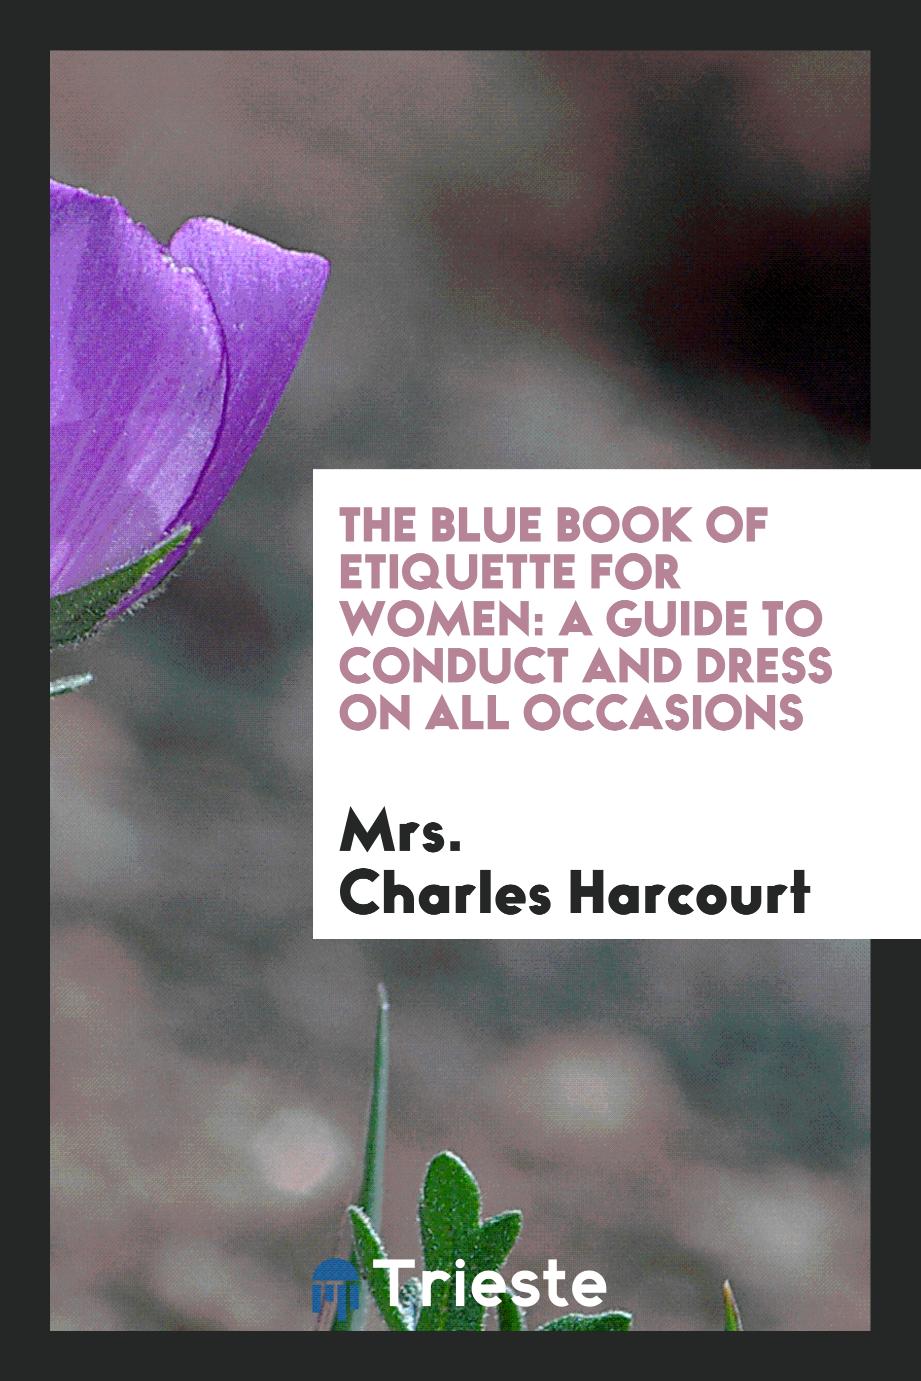 The Blue Book of Etiquette for Women: A Guide to Conduct and Dress on All Occasions